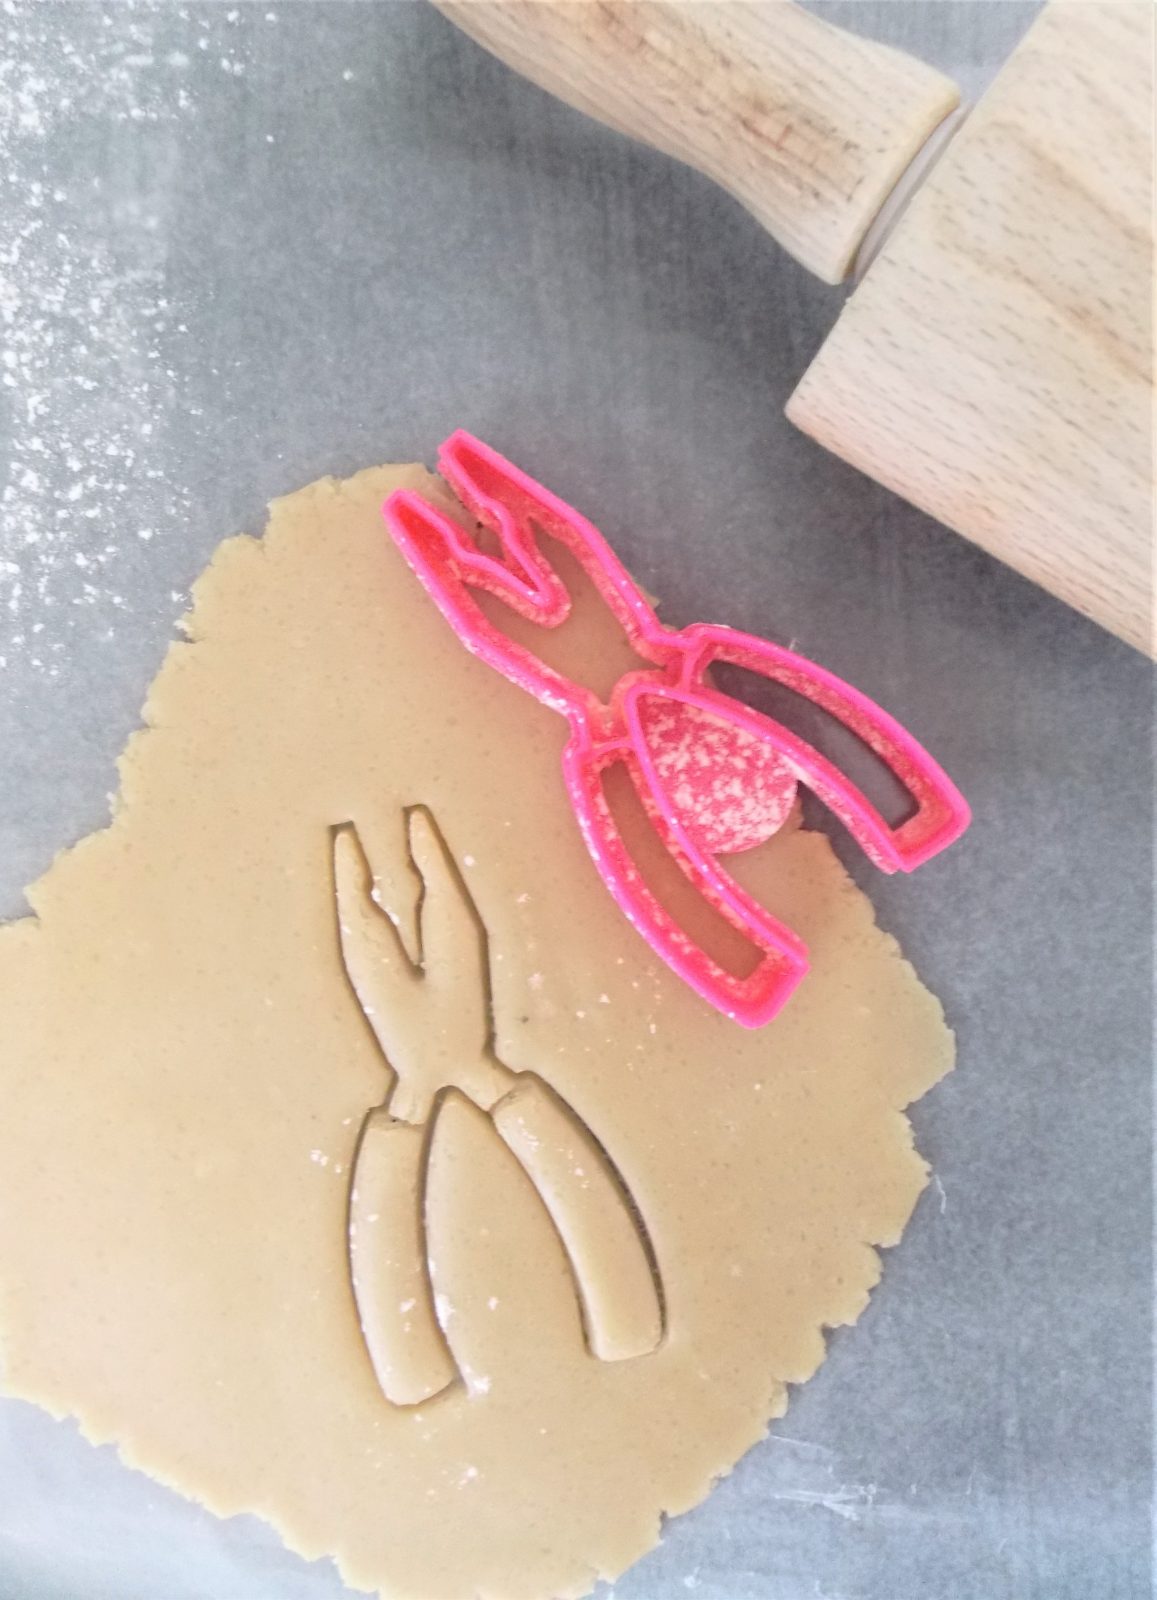 Pliers Cookie Cutter